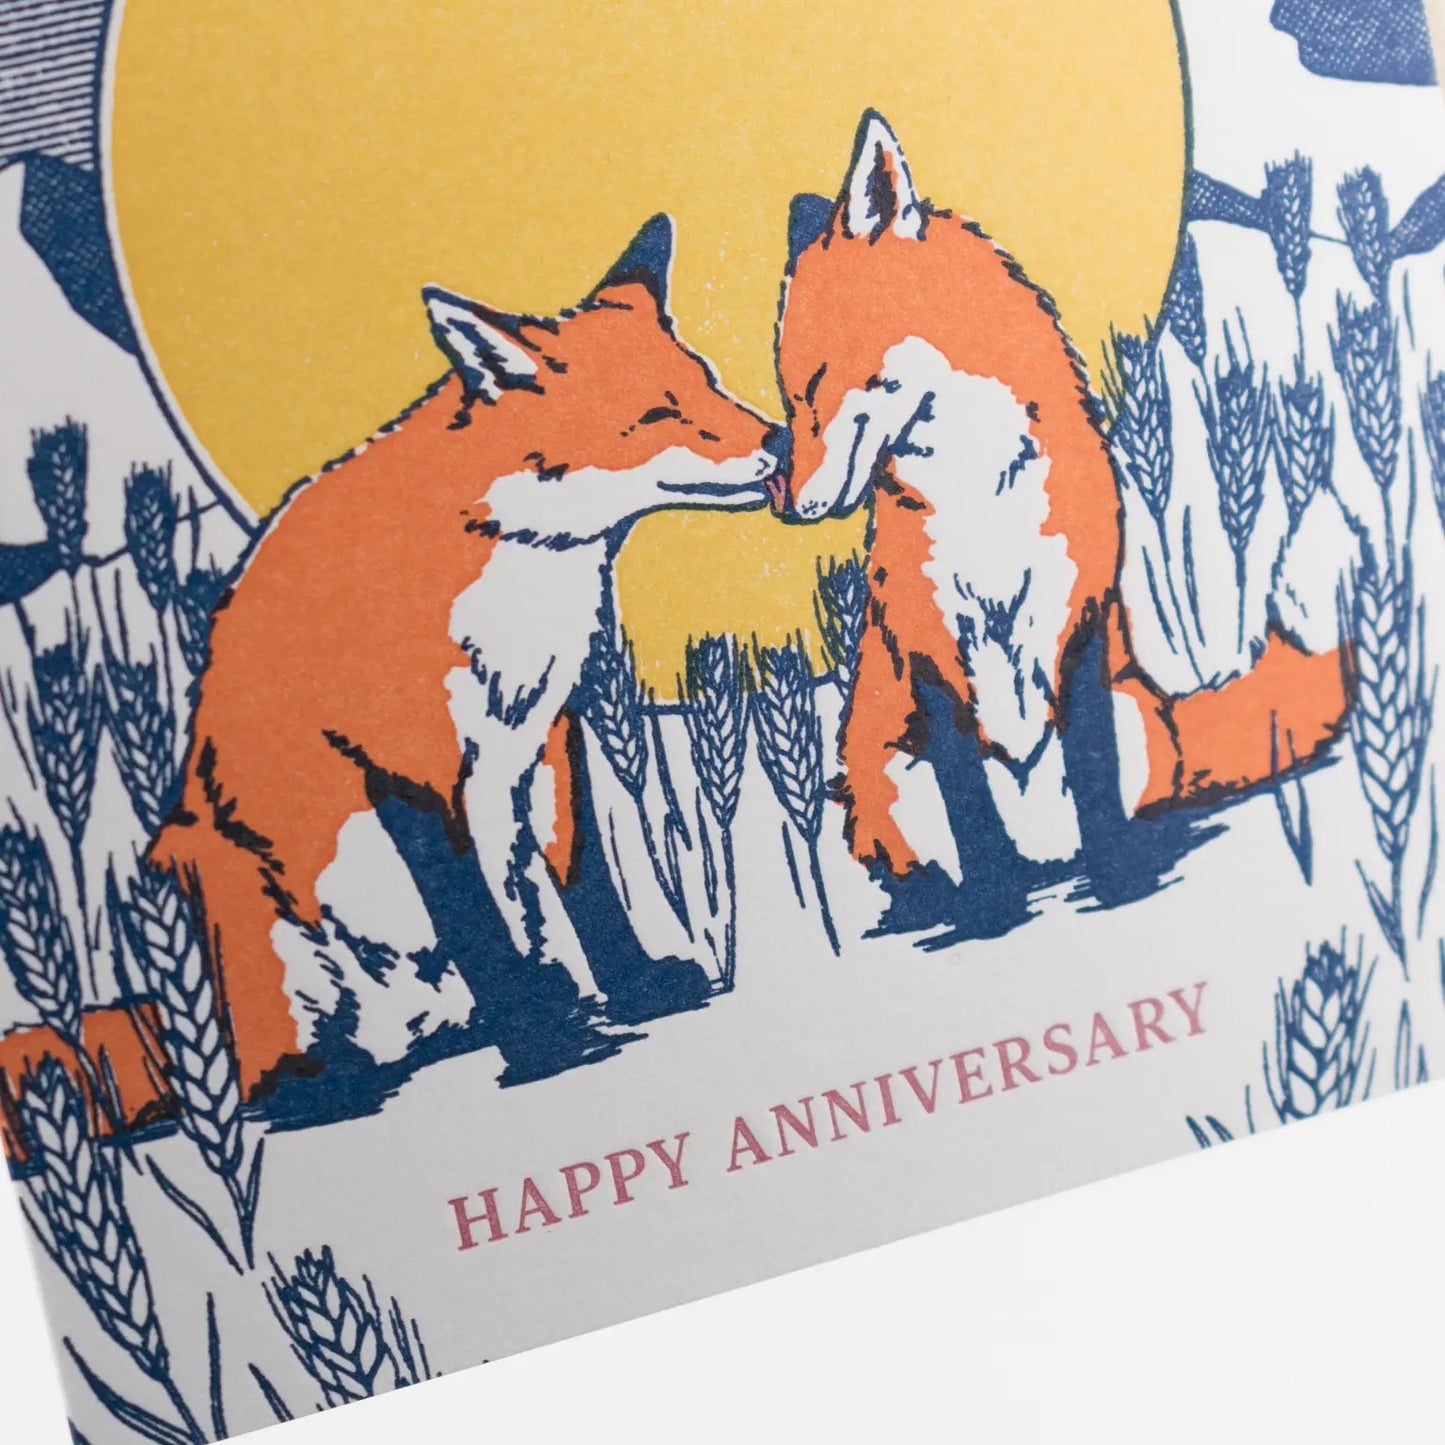 "Foxes in love" Anniversary Card